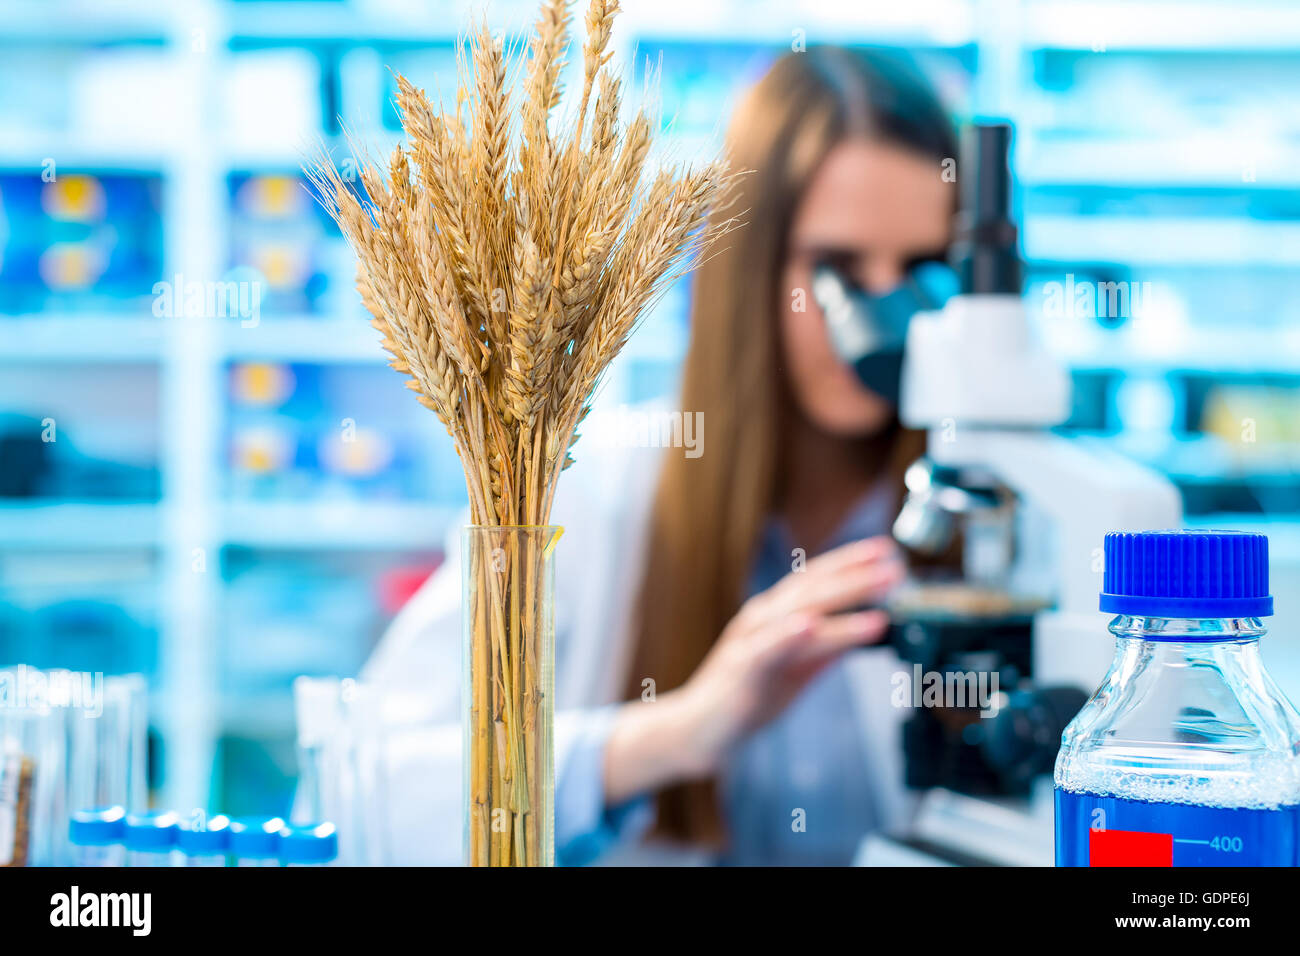 Research wheat crops in the laboratory Stock Photo